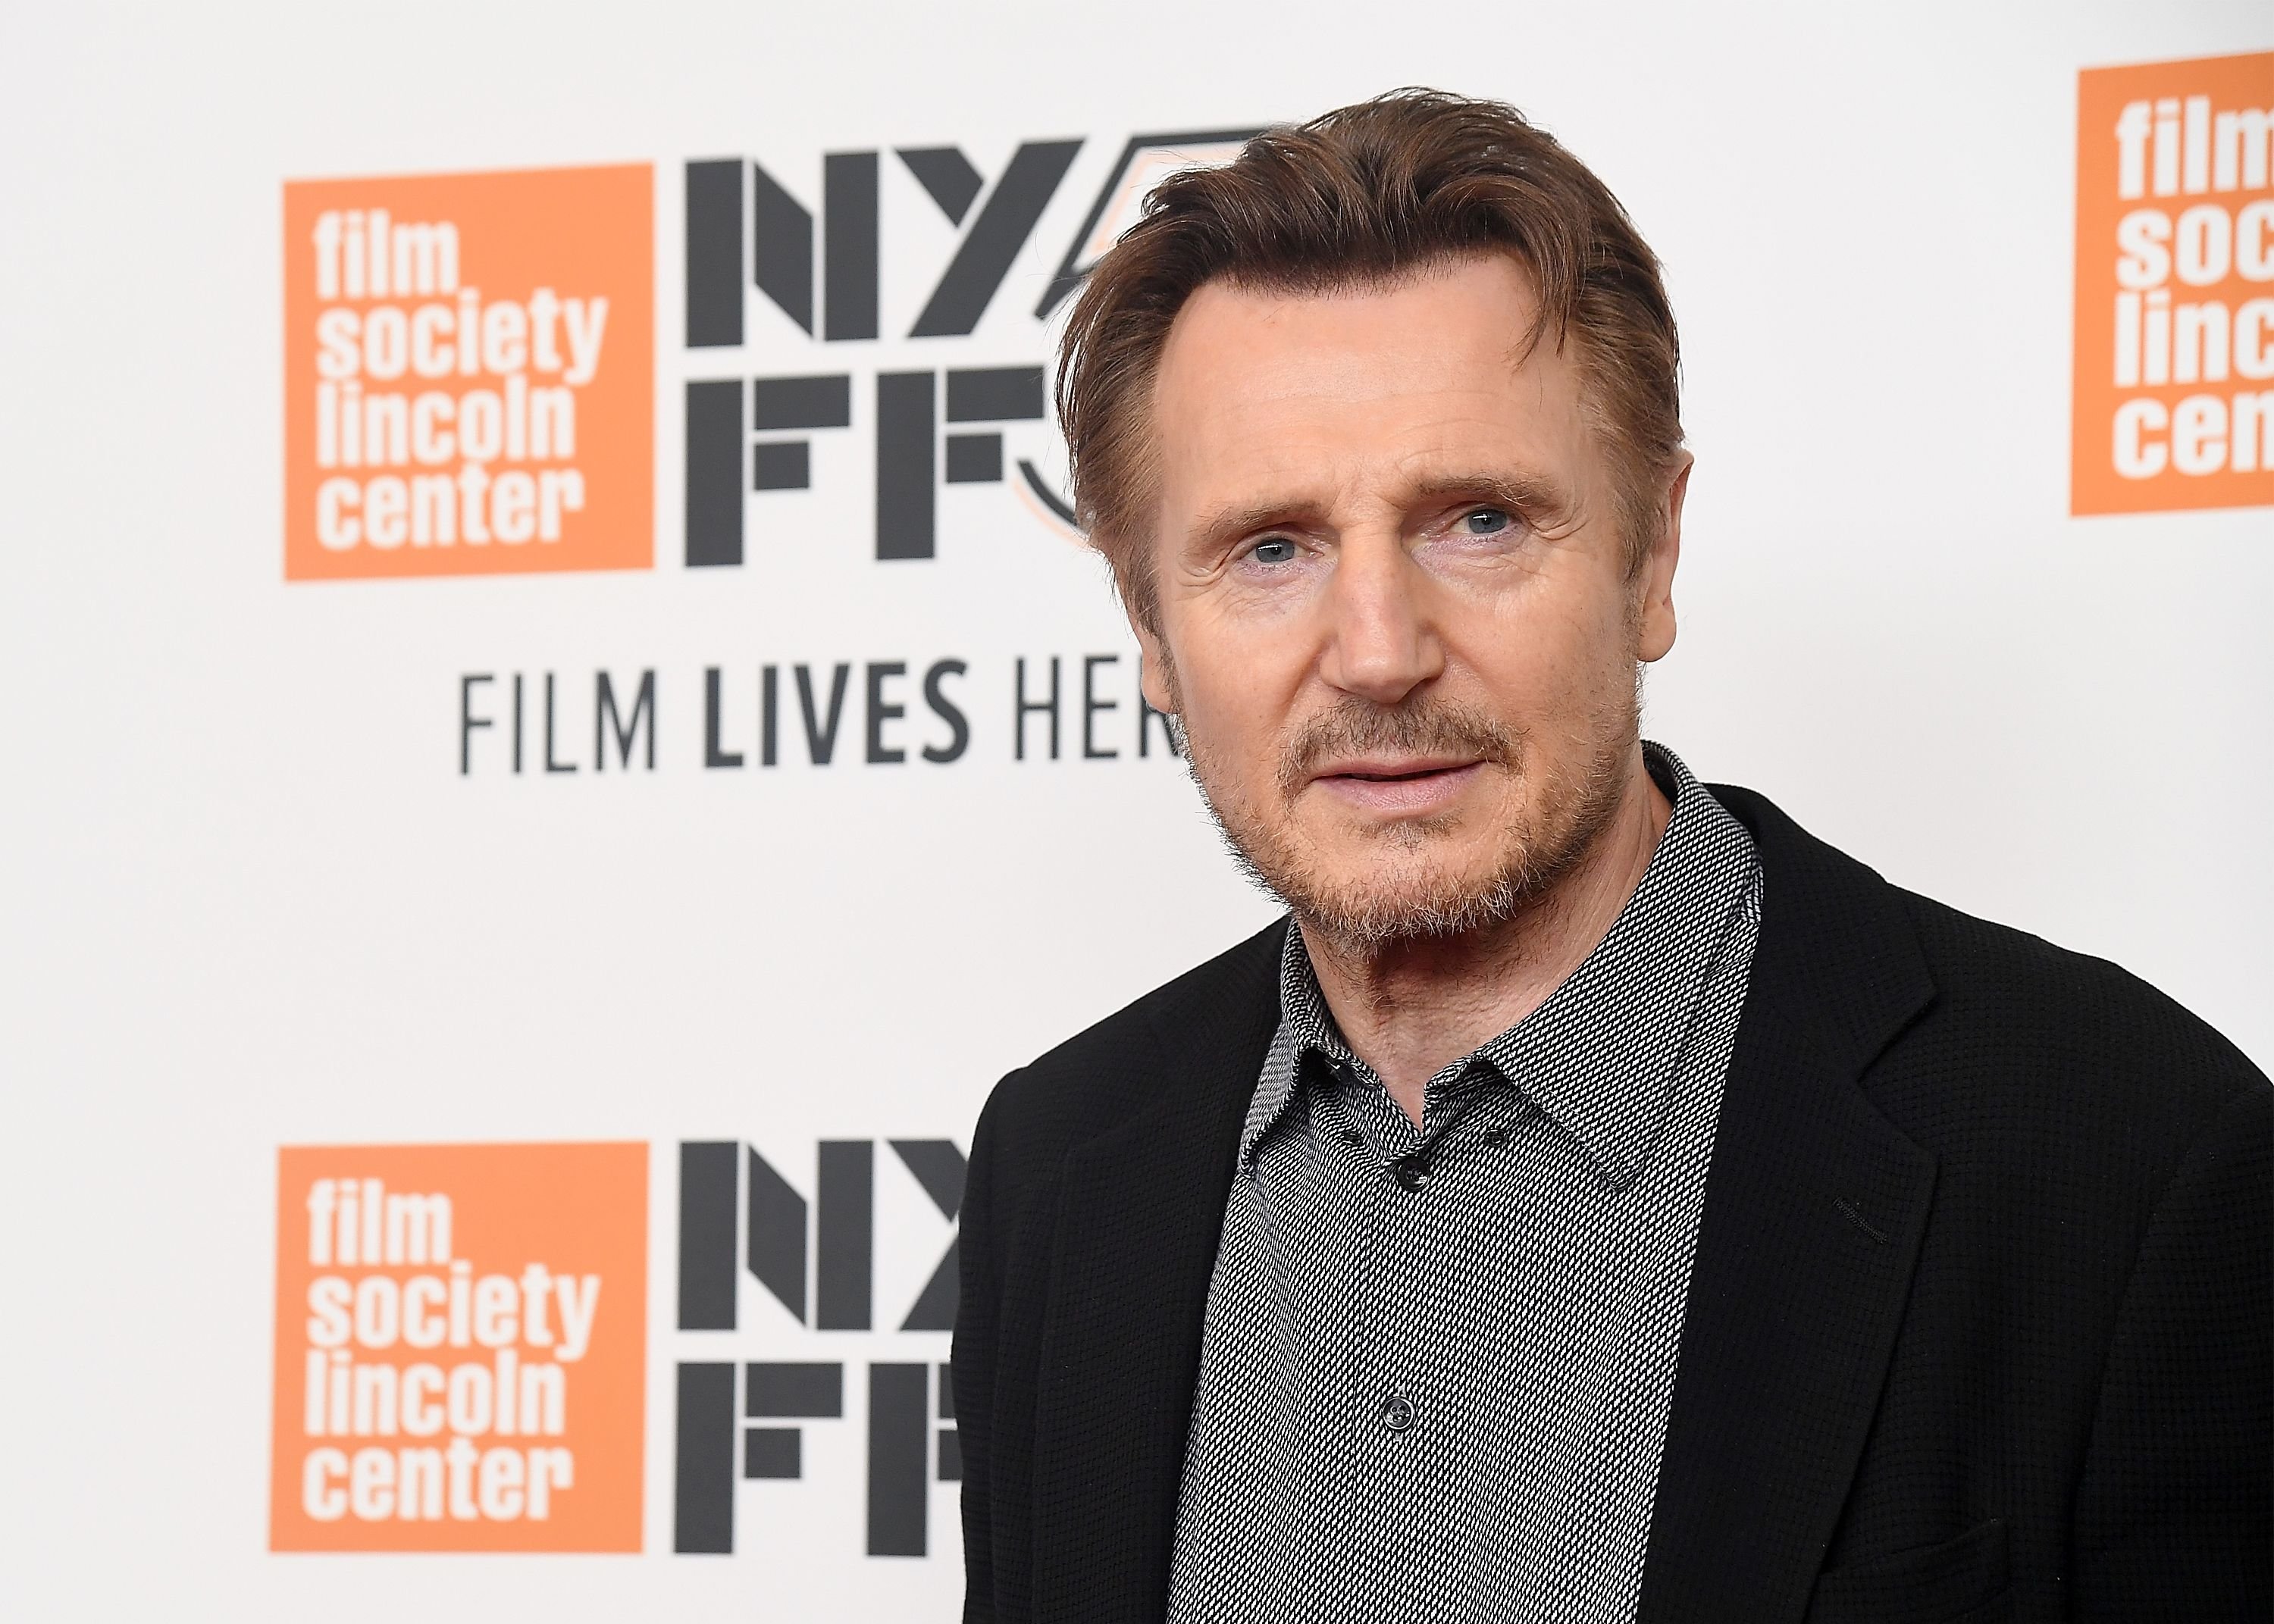 Liam Neeson at the screening of "The Ballad of Buster Scruggs" during the 56th New York Film Festival on October 4, 2018. | Photo: Getty Images